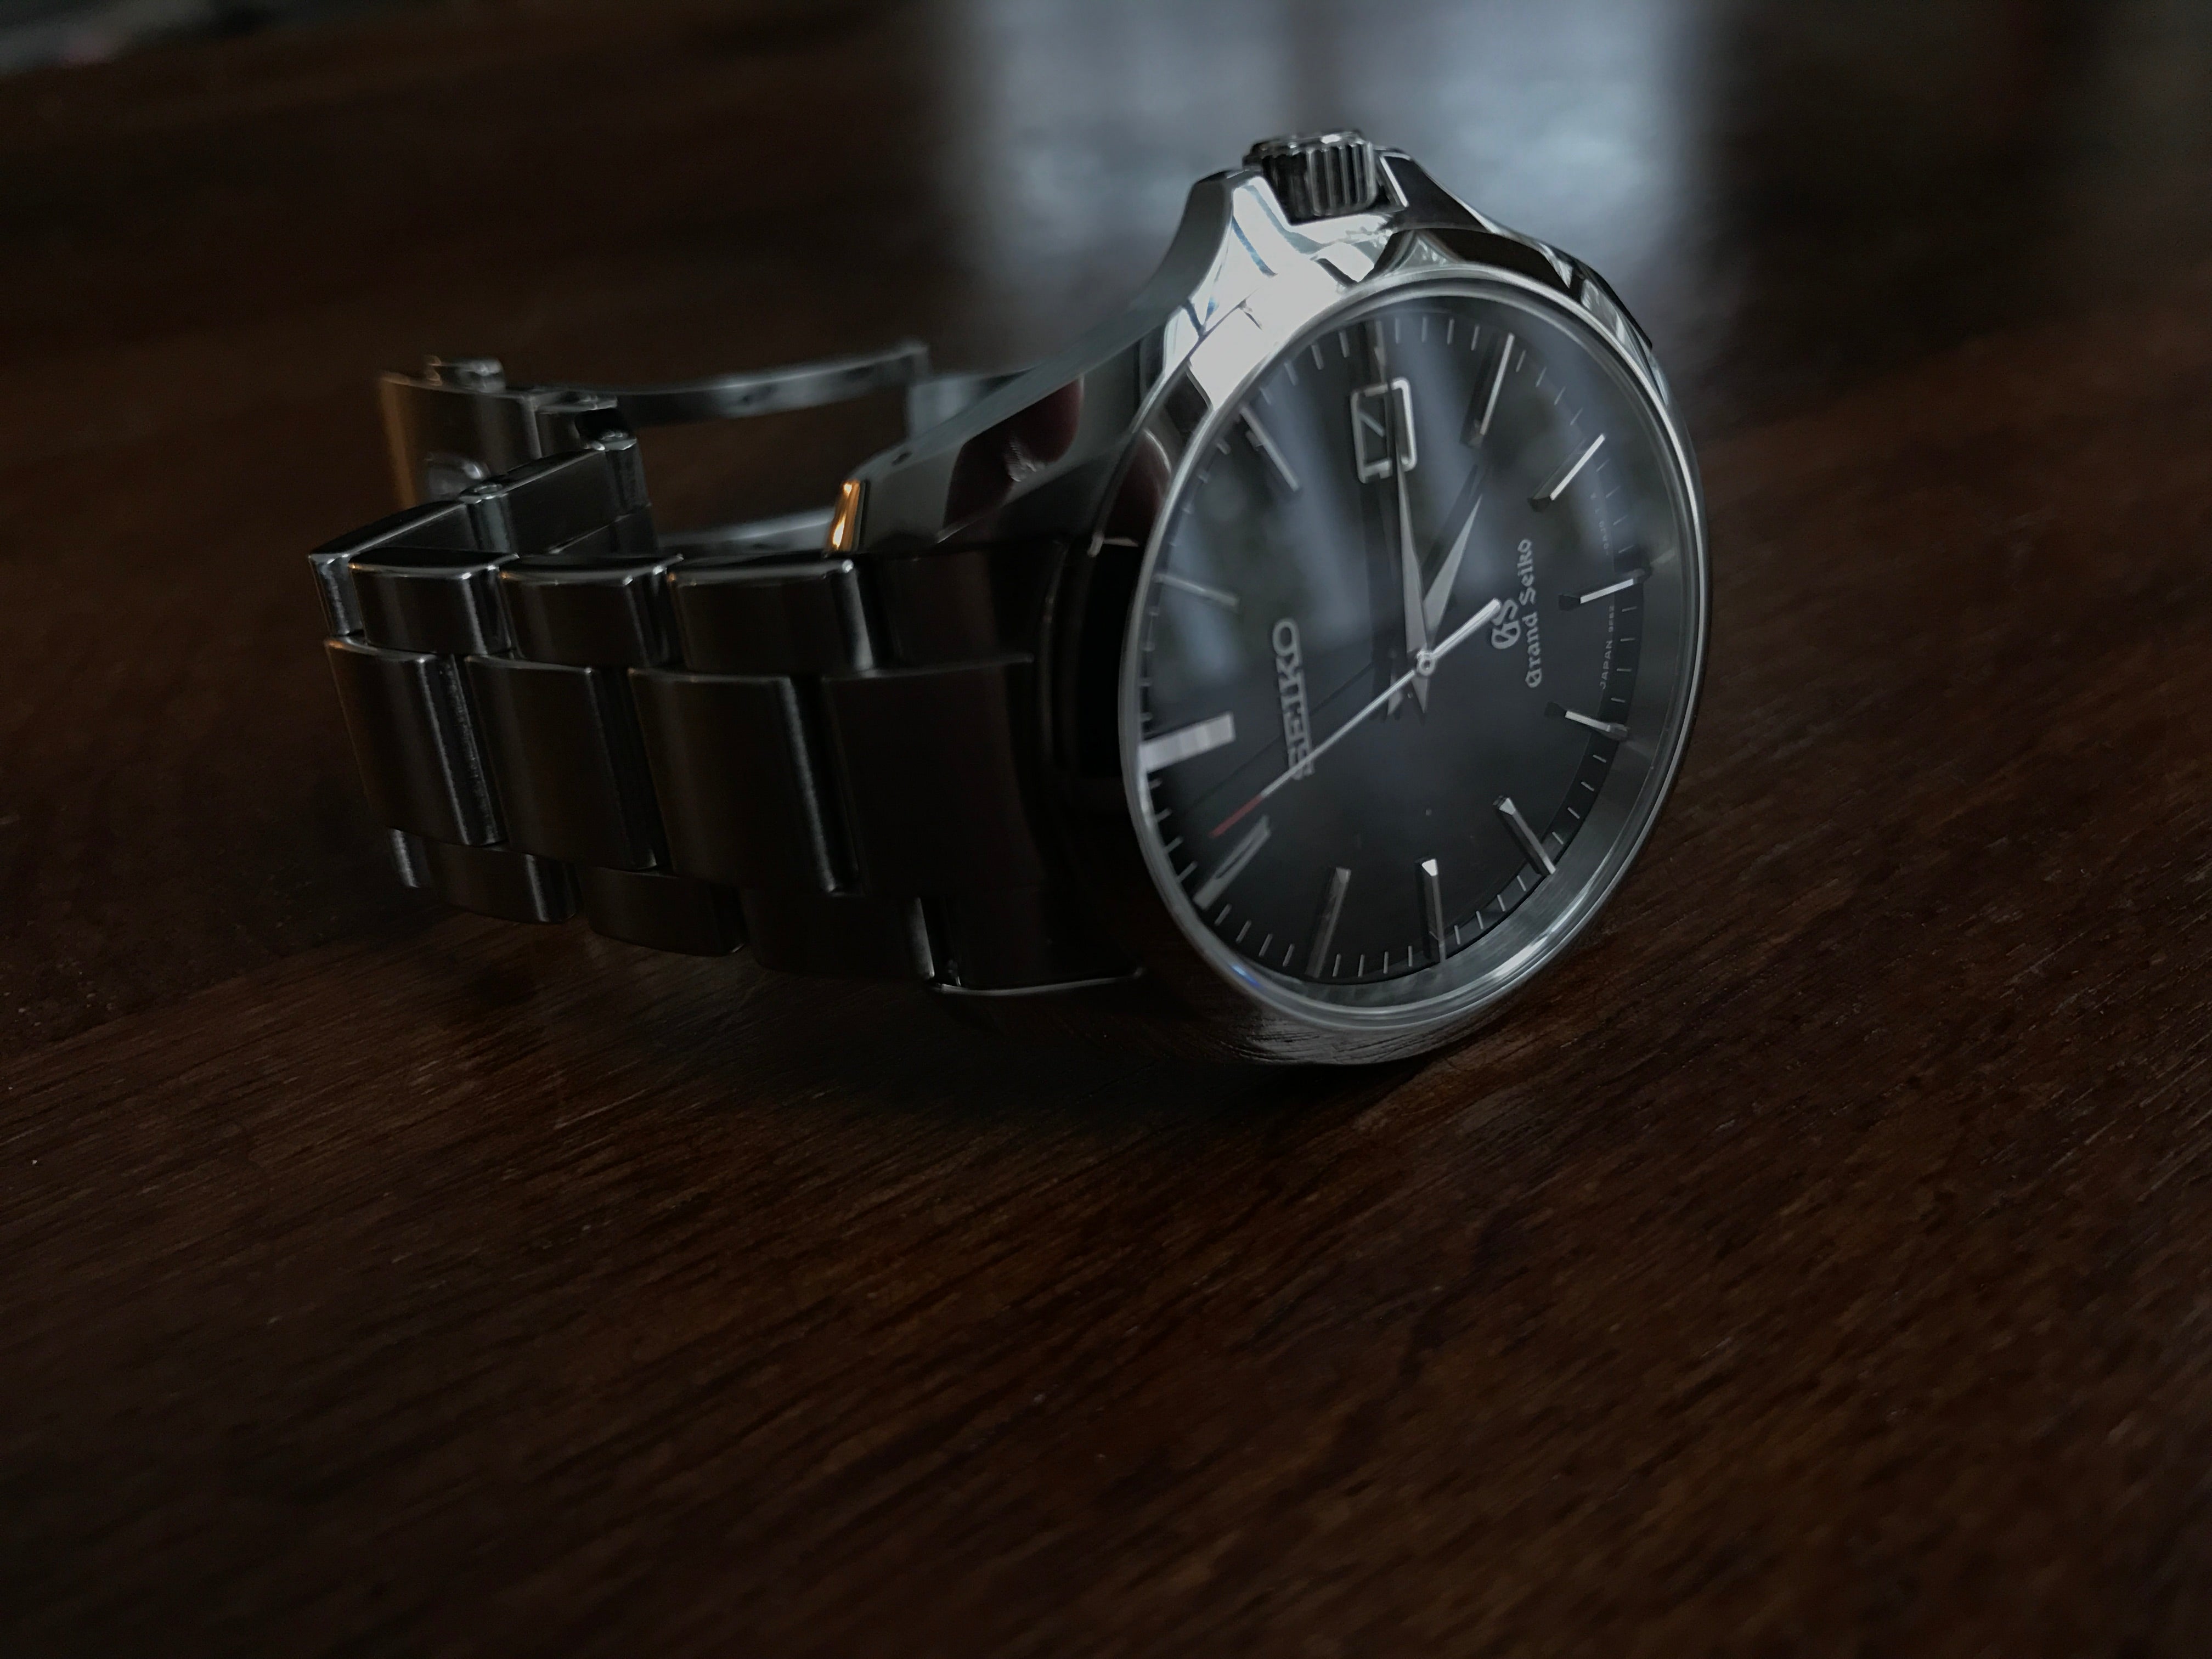 A review of the Grand Seiko Master Shop SBGX083 | WatchUSeek Watch Forums